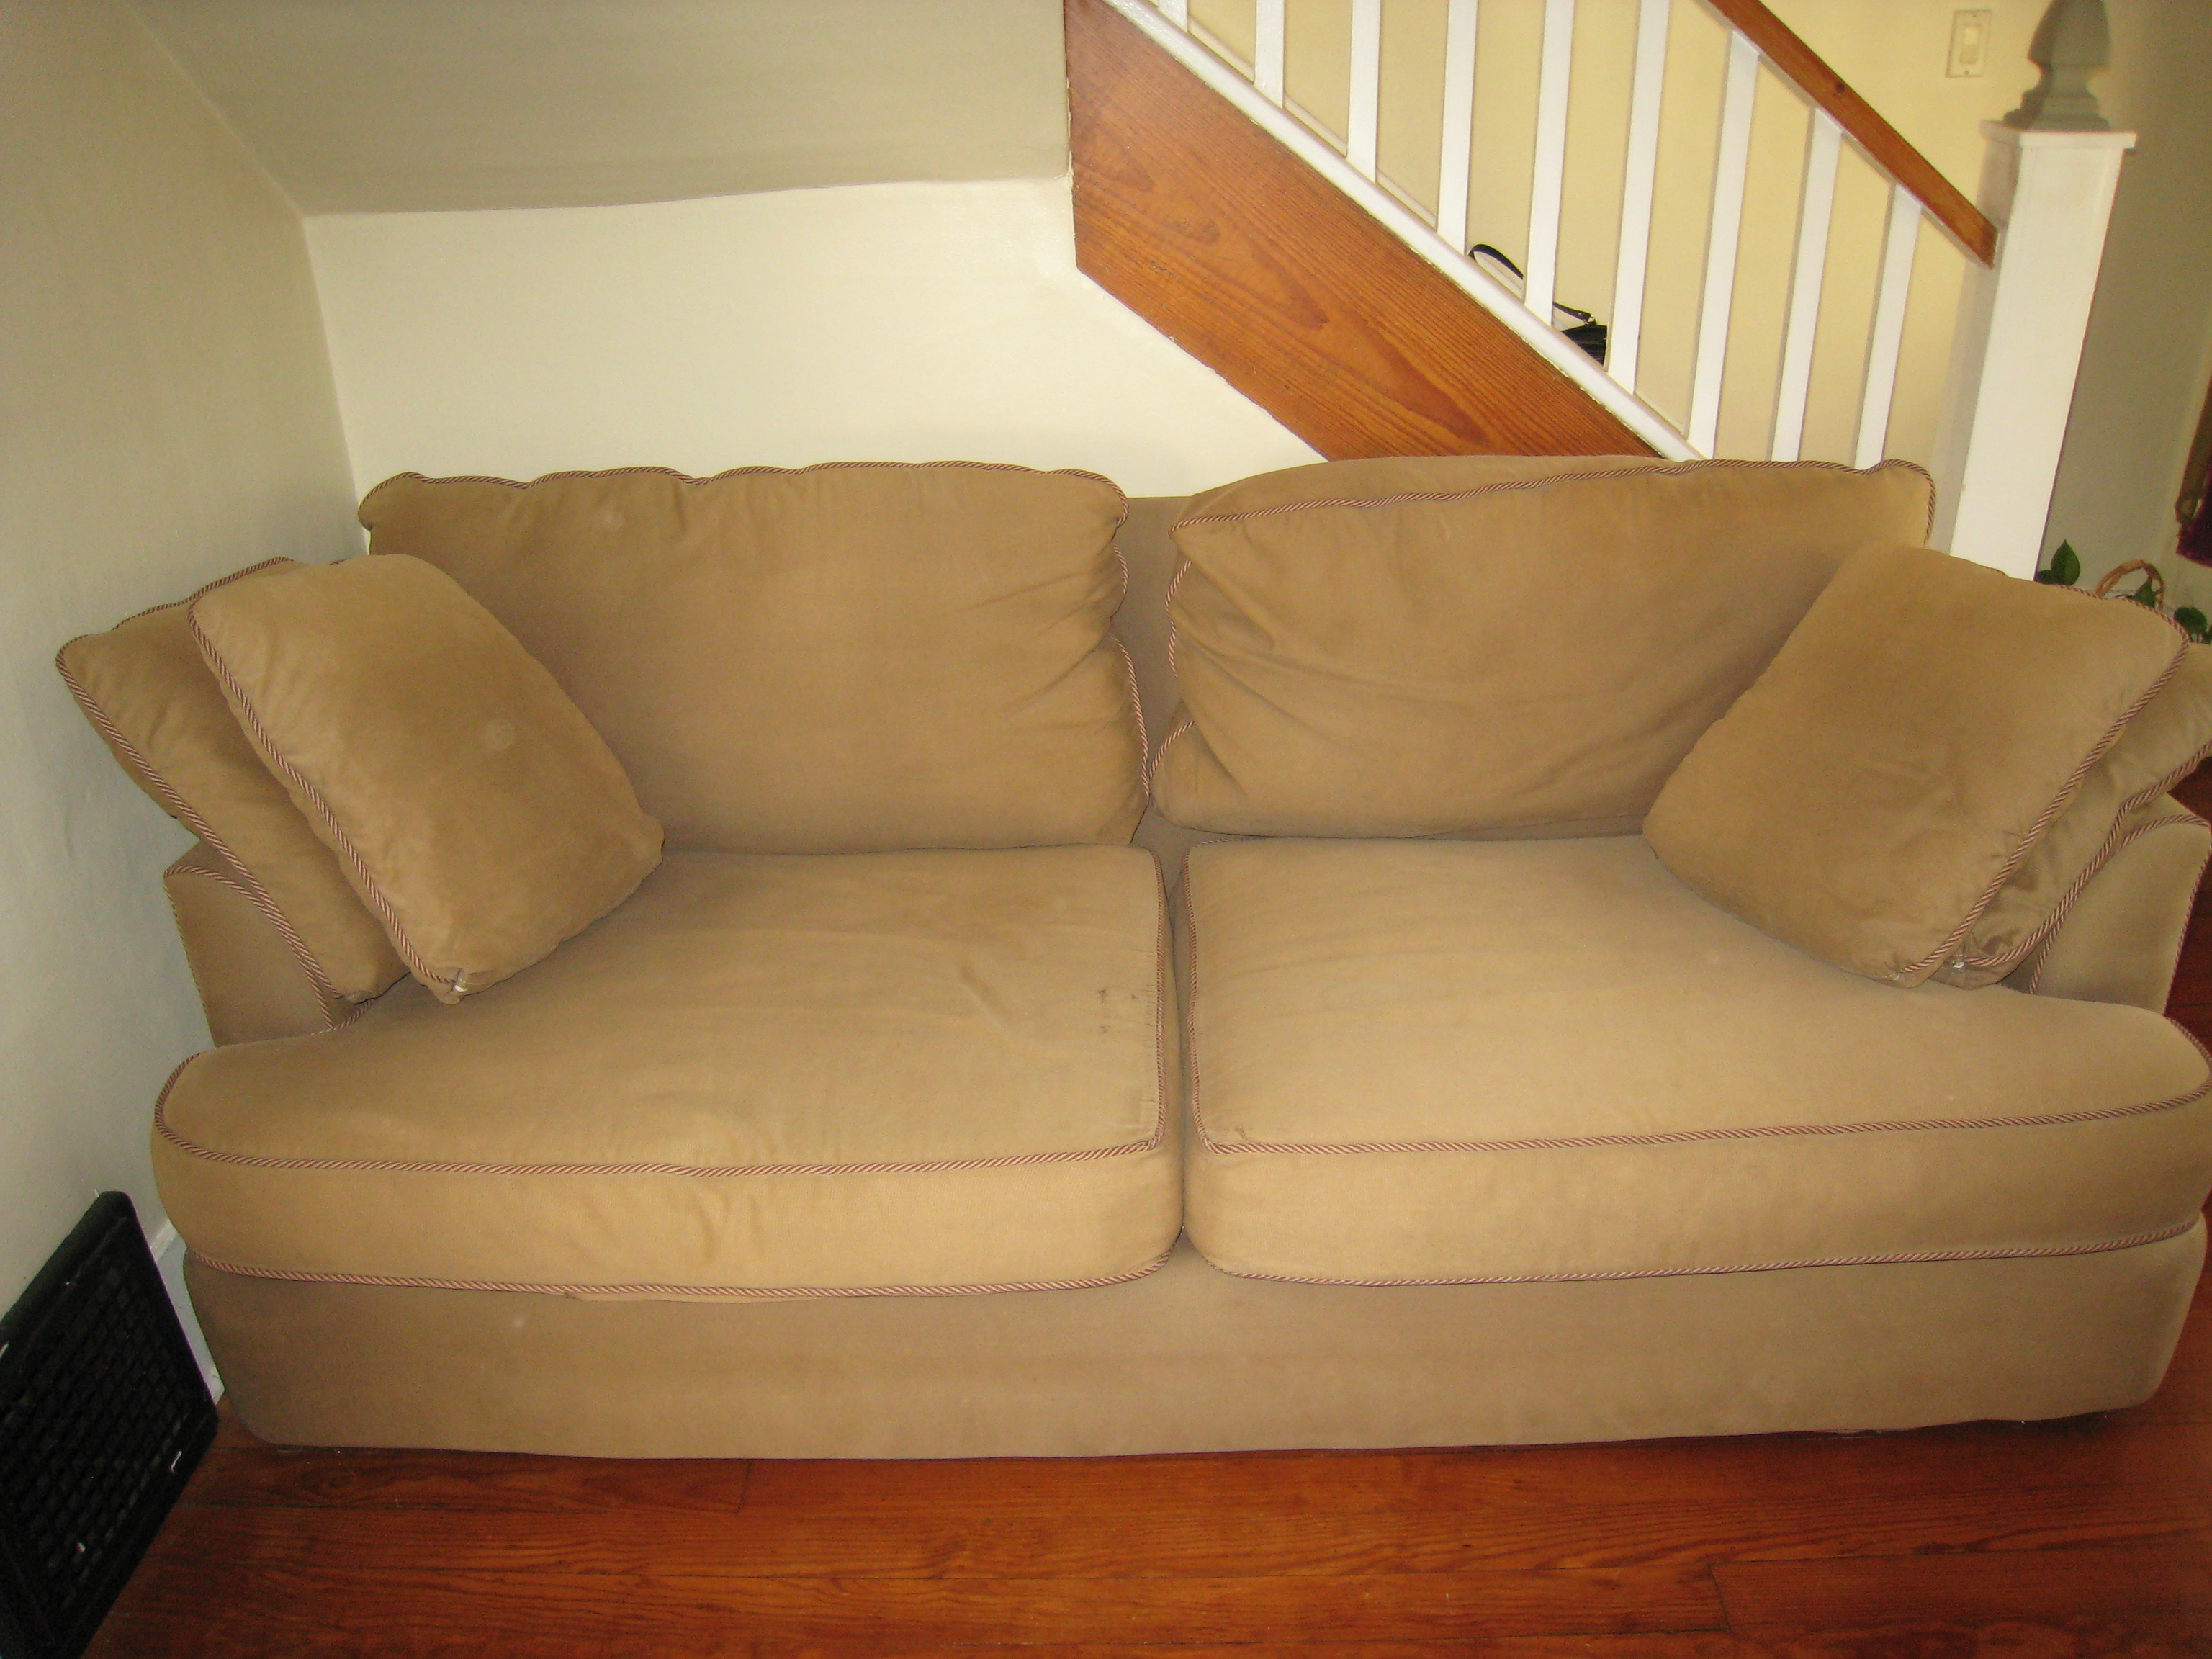 Hudson's couch